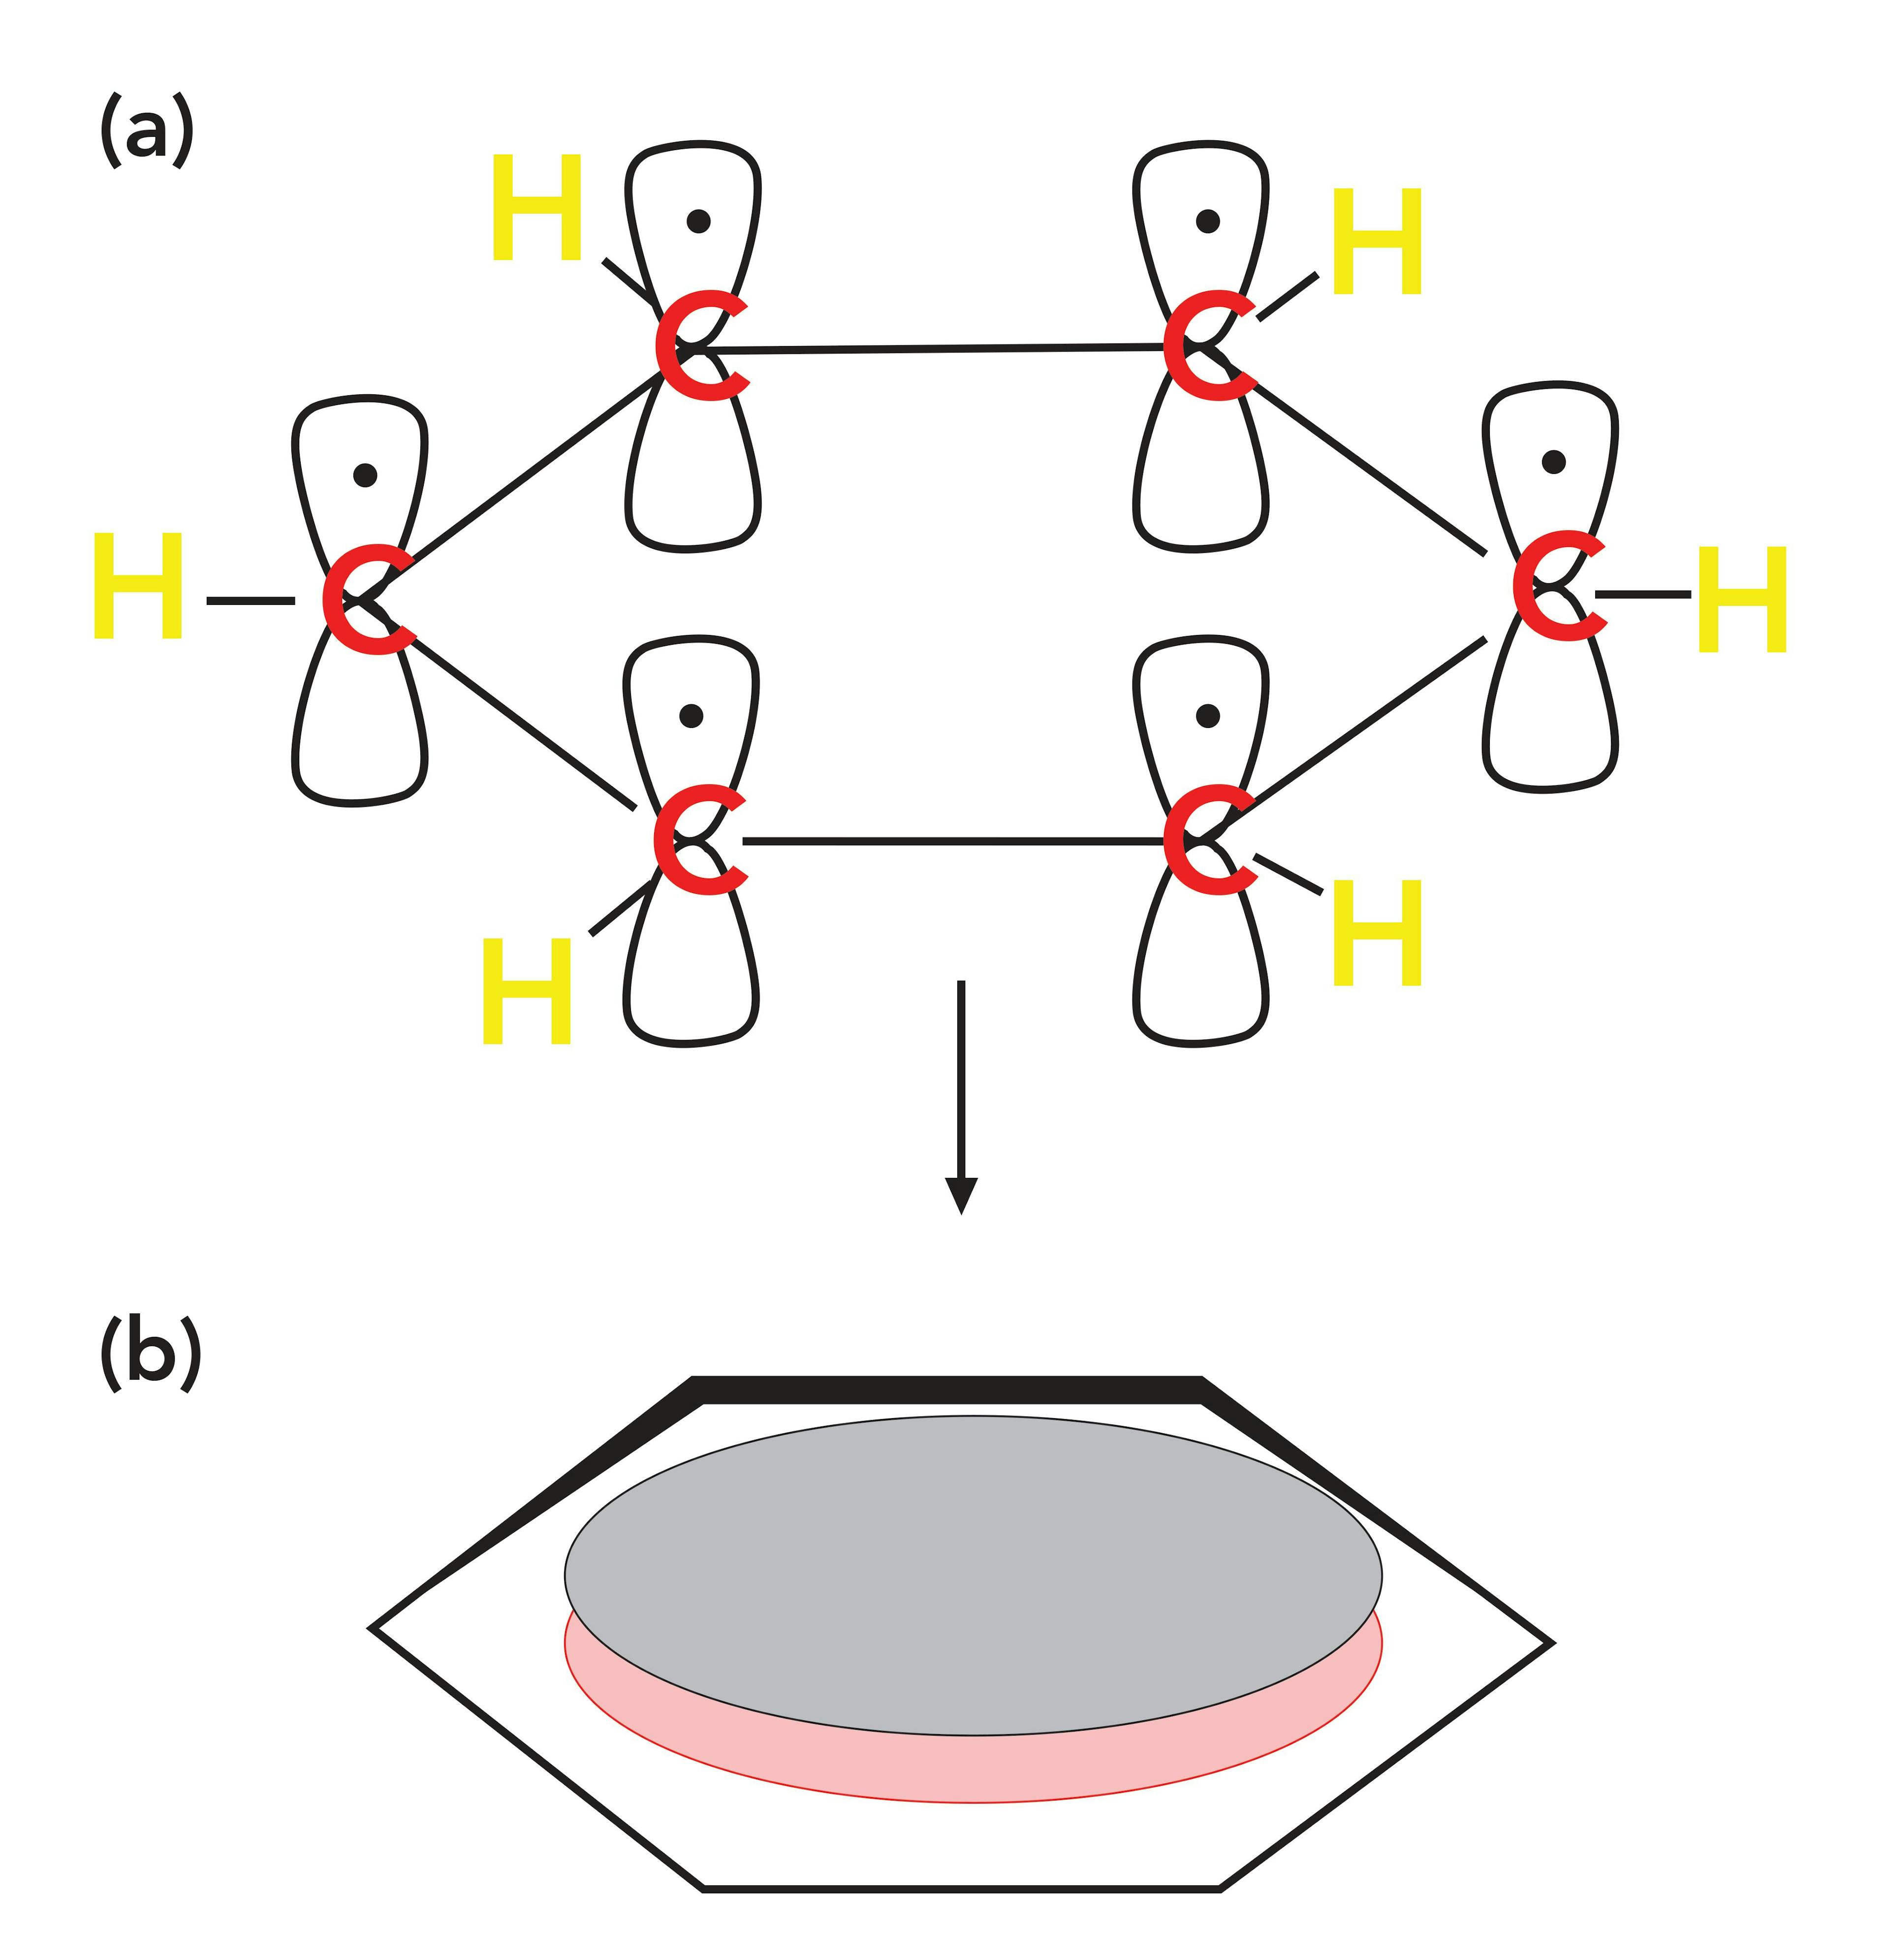 Figure 4: (a) The p orbitals on each of the six carbon atoms in benzene that each contribute an electron to the ring. (b) The collection of delocalized P orbital electrons that form a pi cloud of pi electron density above and below the plane of the benzene ring.